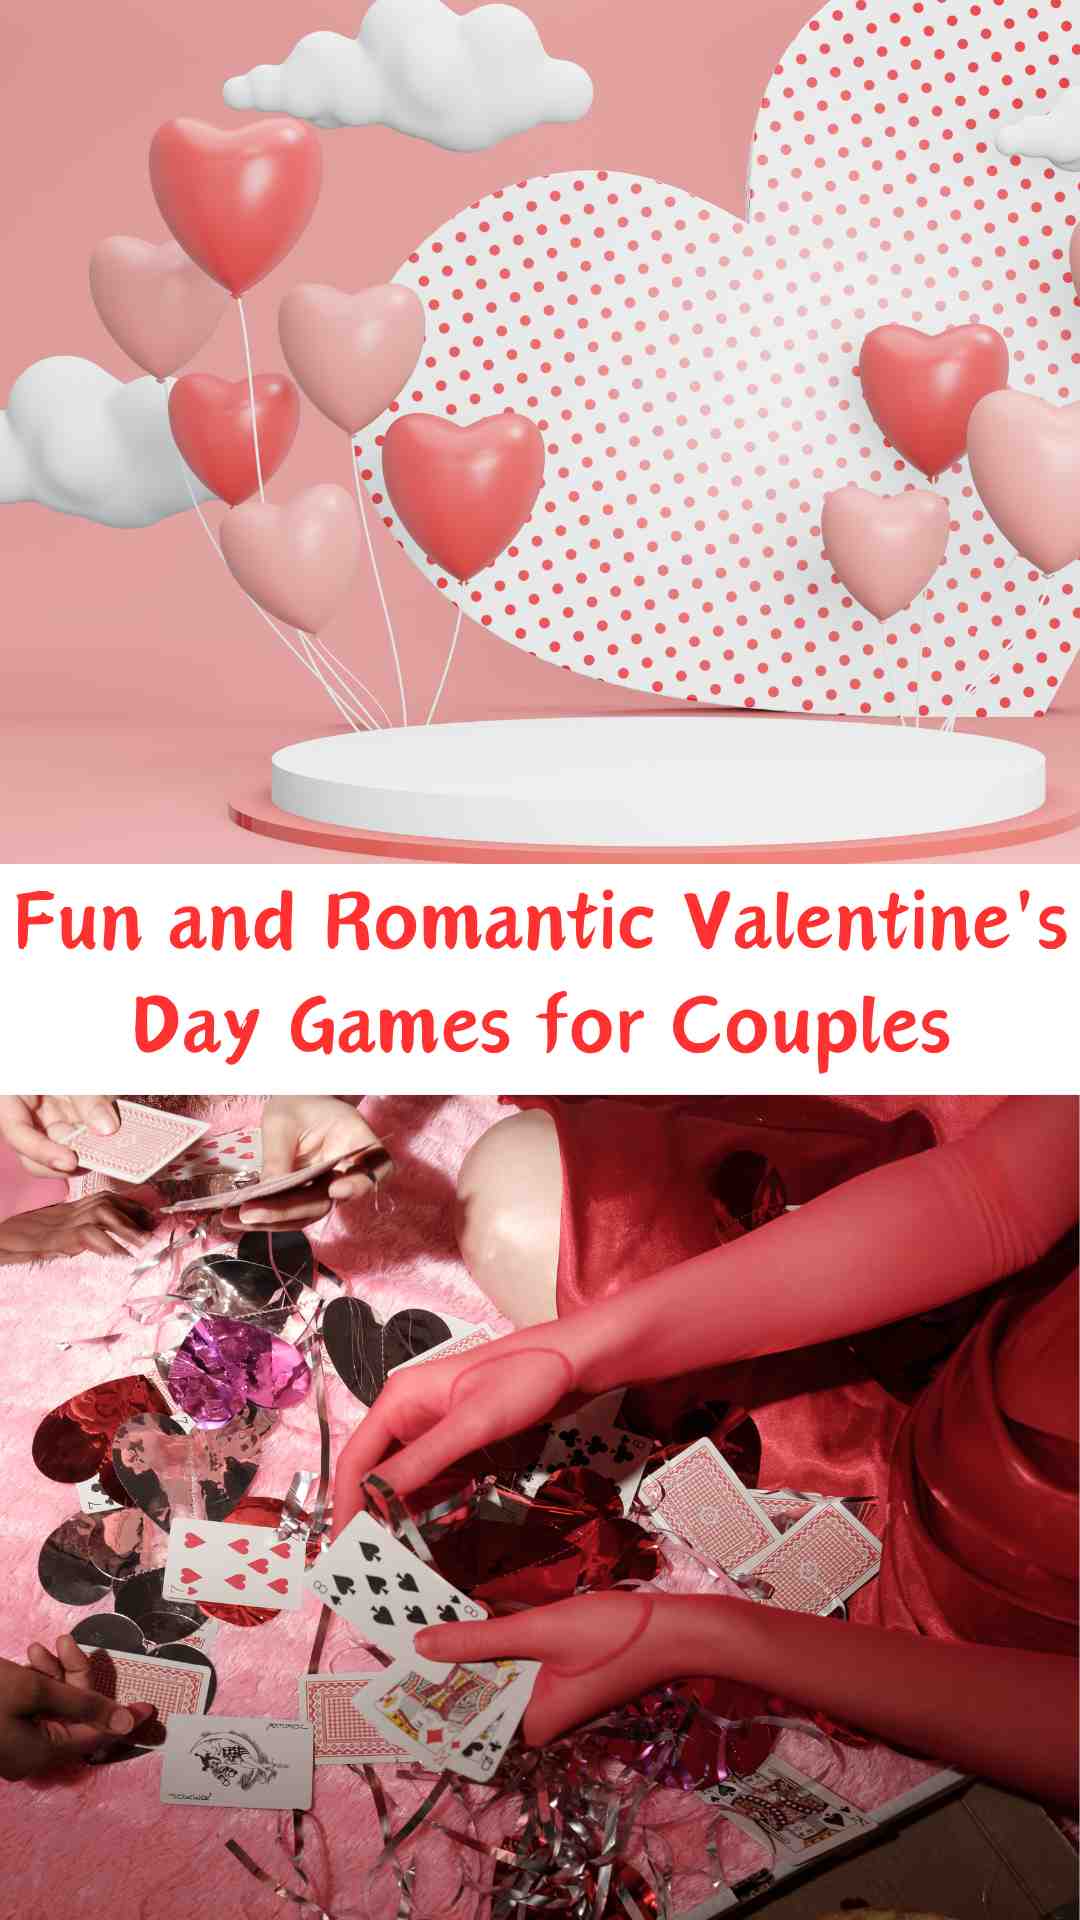 Fun and Romantic Valentine's Day Games for Couples